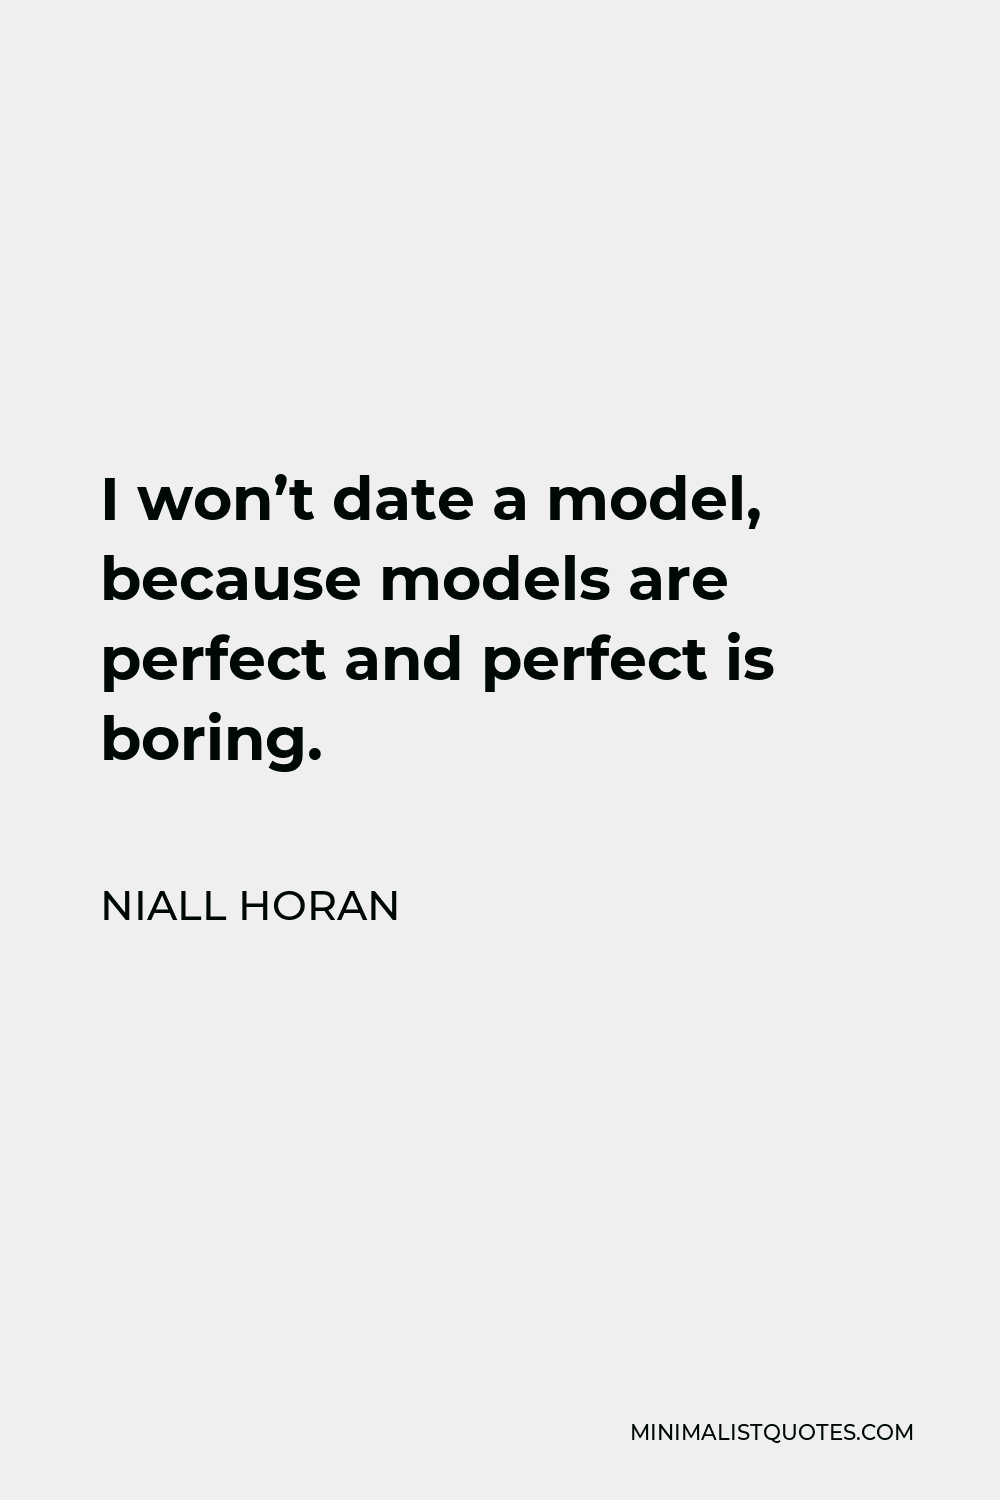 Niall Horan Quote - I won’t date a model, because models are perfect and perfect is boring.